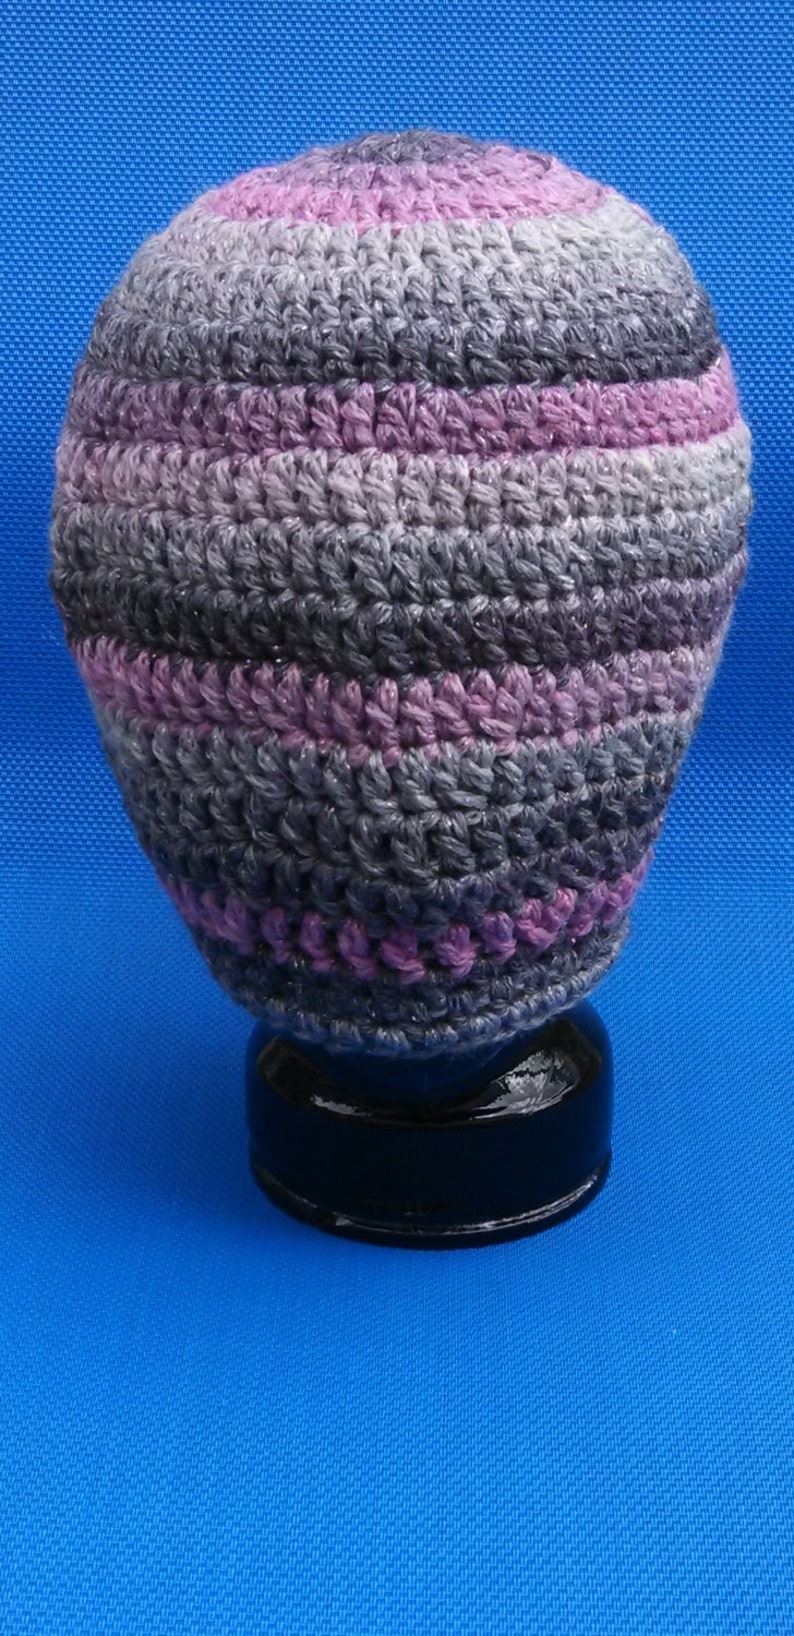 Slouchy Crochet Hat Pink and Grey/Gray Soft and Warm Ready To Ship Great for Chritmas and Winter Beret Tam Dreads image 5